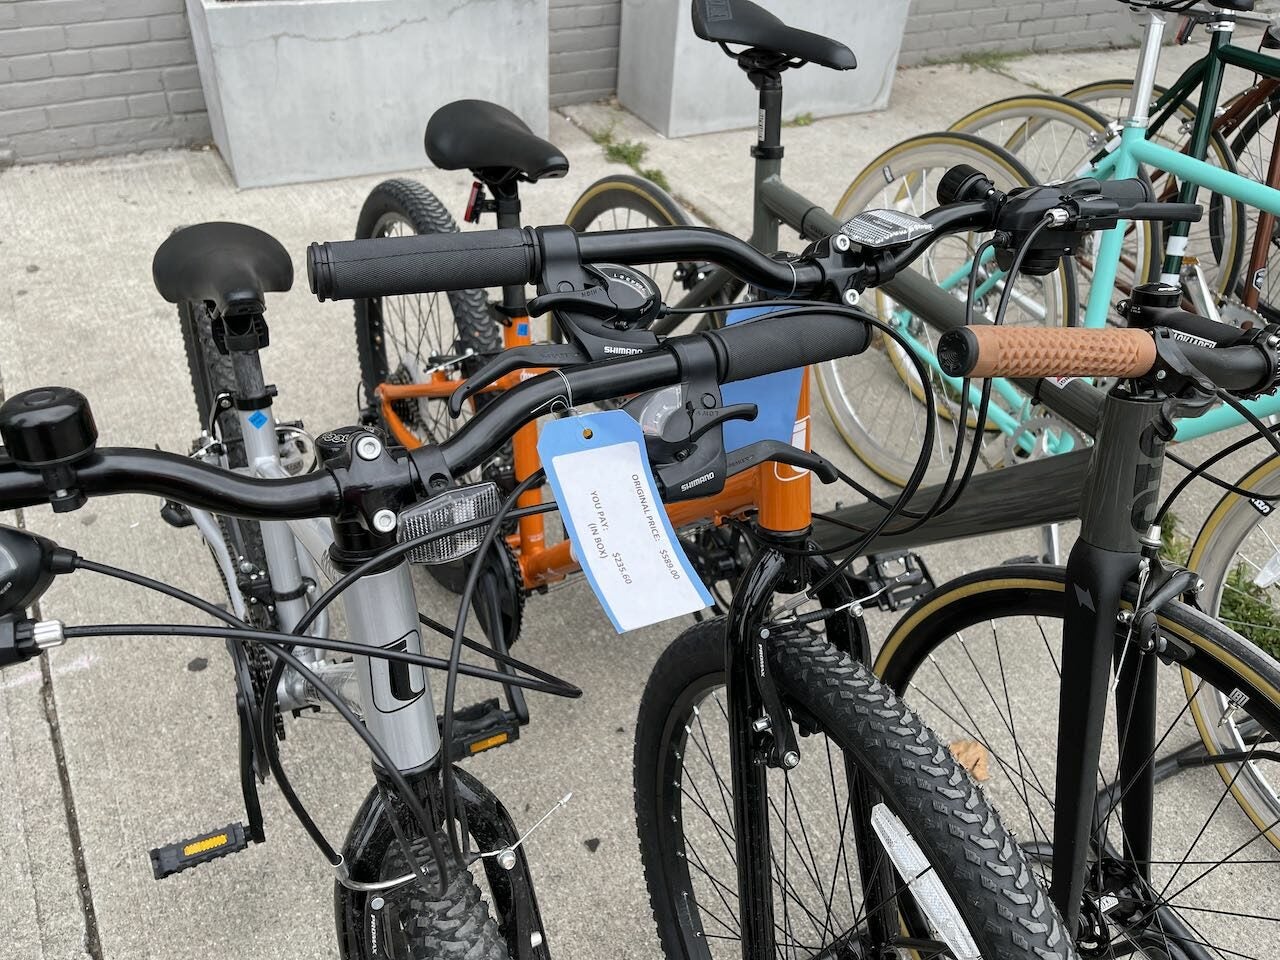 Michaels Cycles Michaels Cycles (Toronto) bikes and accessories liquidation (50-70% off retail)